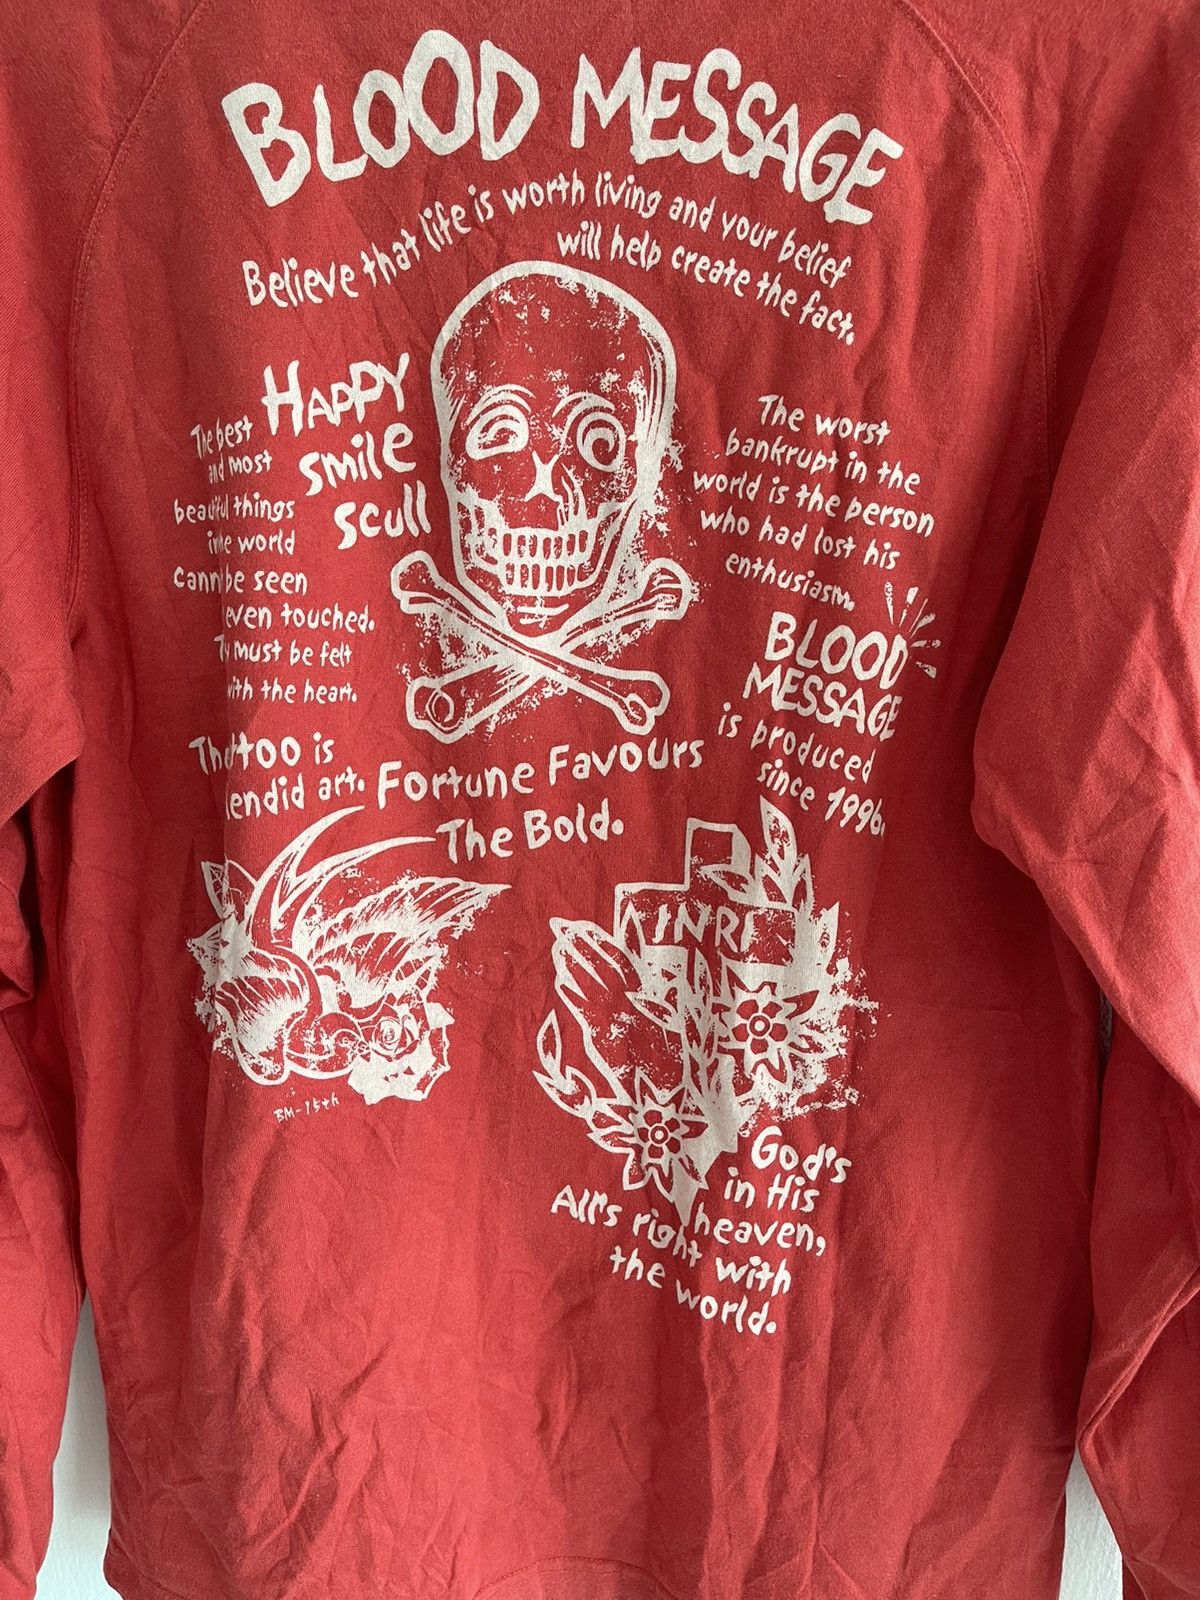 VINTAGE BLOOD MESSAGE TEE BY TEDMAN COMPANY - 5